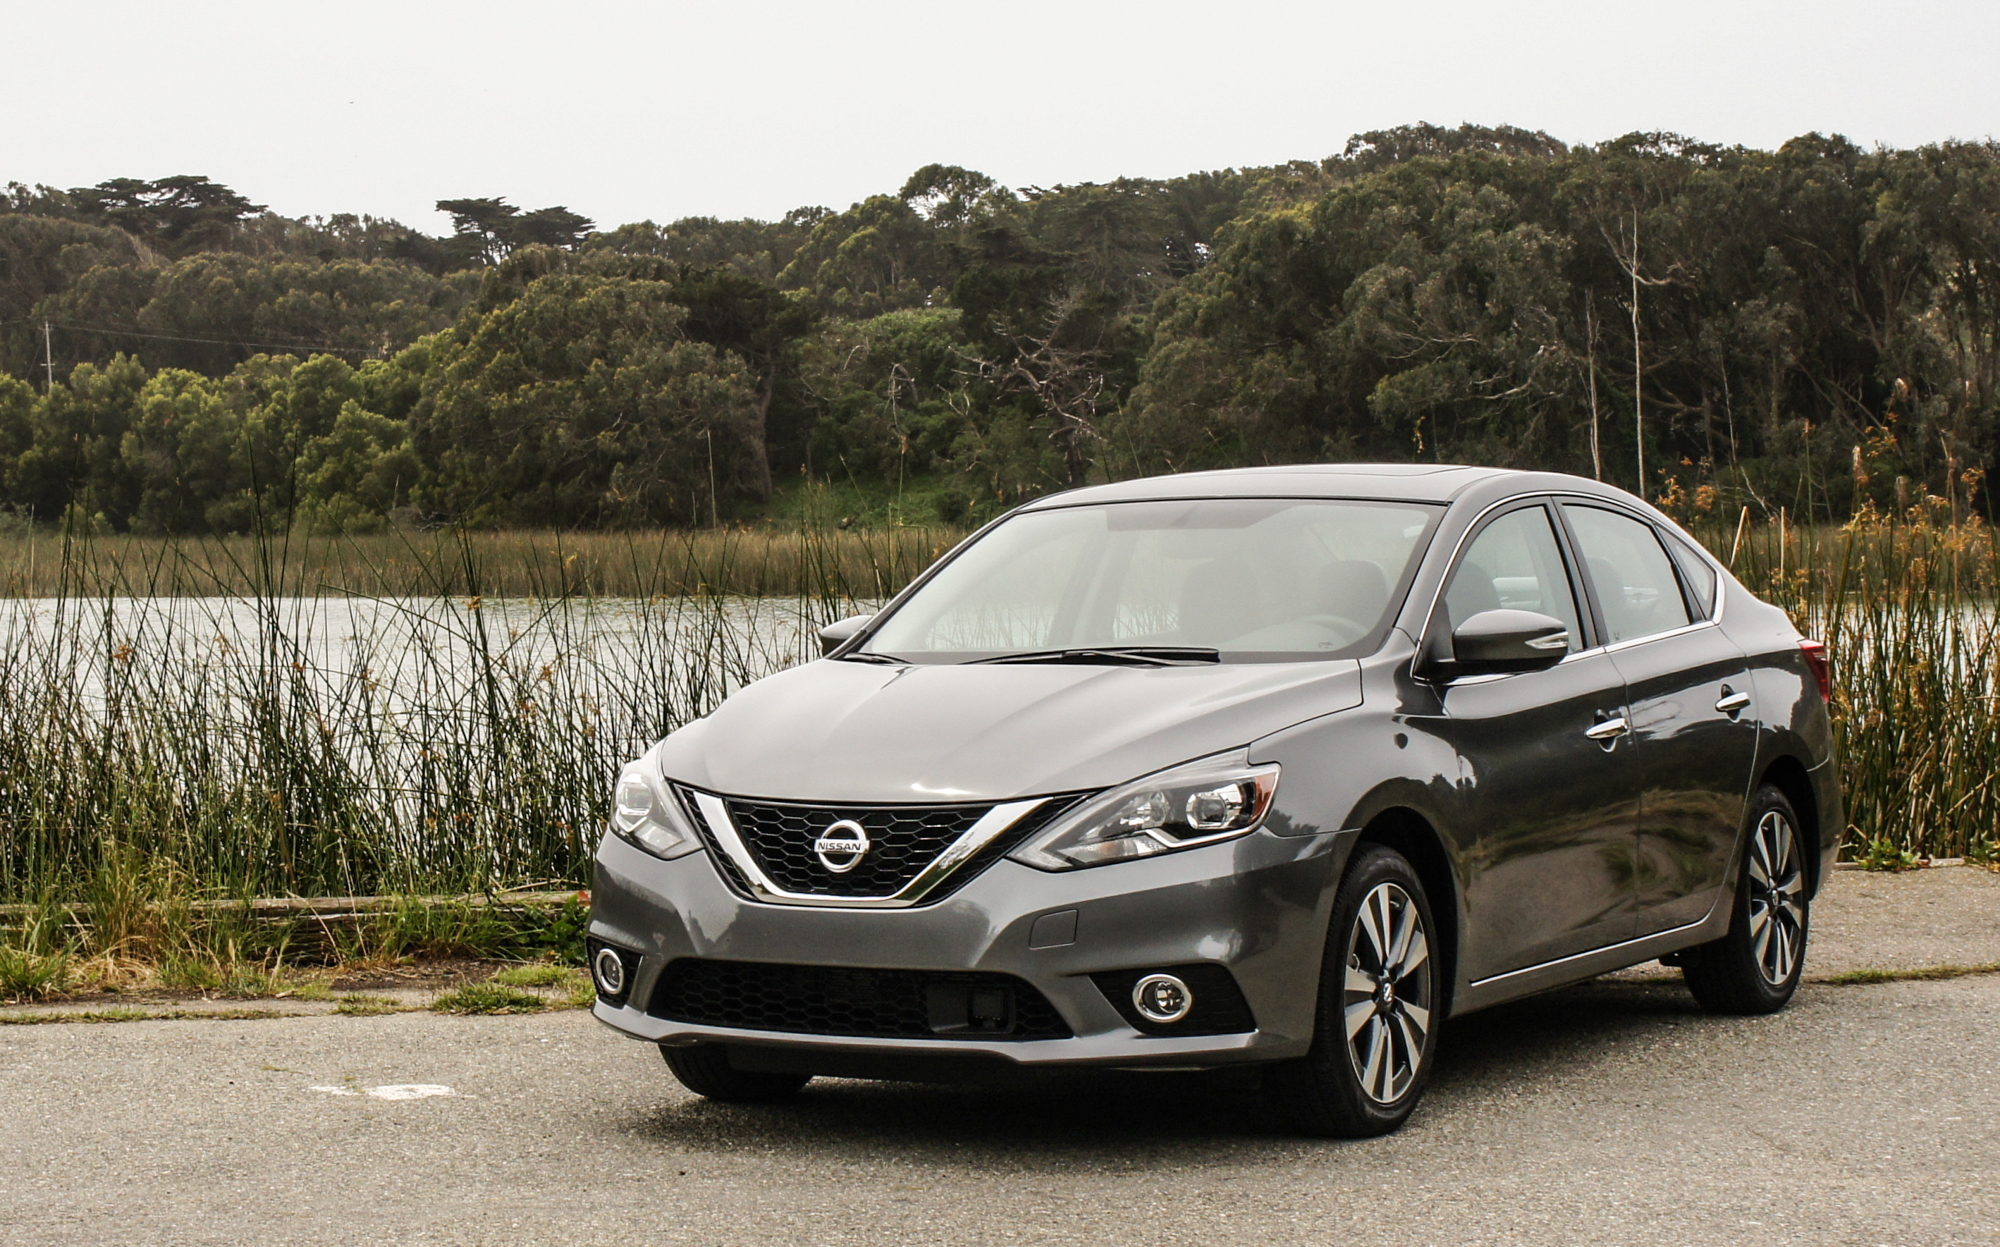 2016 Nissan Sentra review: Lowly Nissan Sentra competes with the luxury  class when it comes to tech - CNET